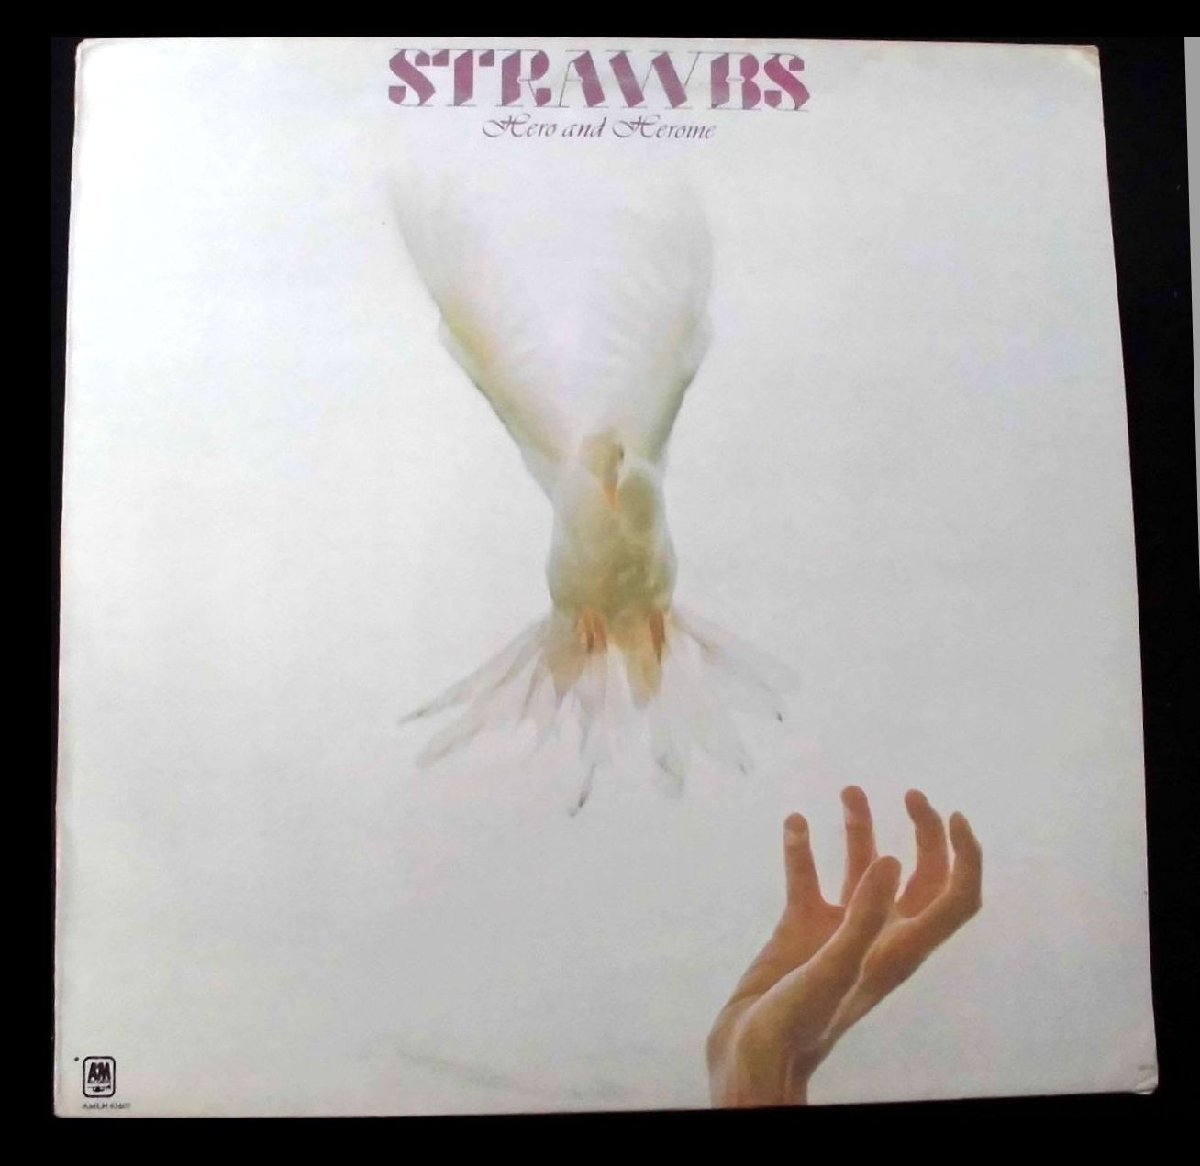 ●UK-A&M RecordsオリジナルDG,Contract-Pressing!! Strawbs / Hero And Heroine_画像1